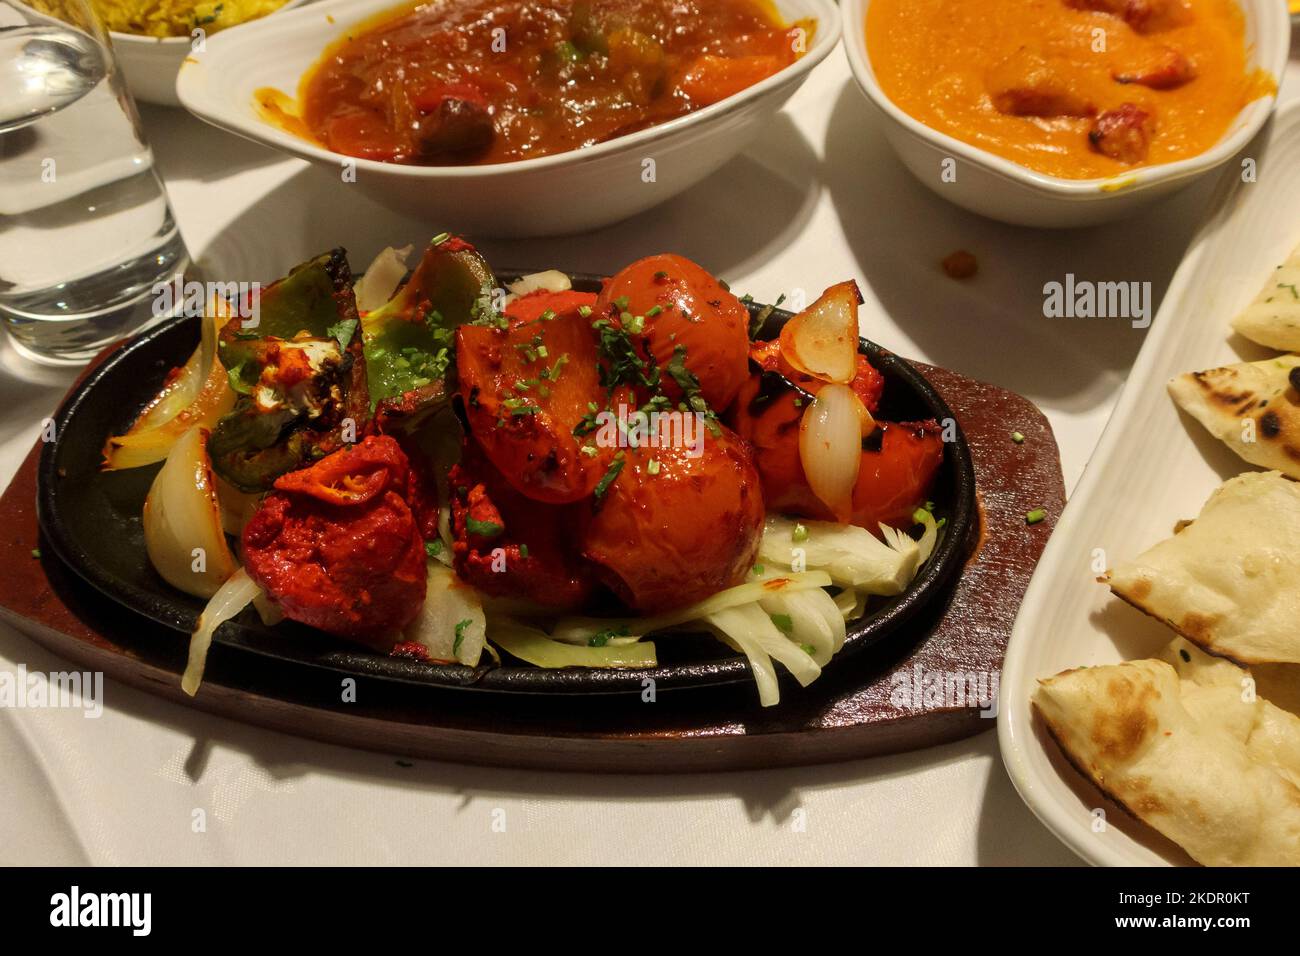 Dishes of Indian food laid out on a table in a restaurant, UK Stock Photo